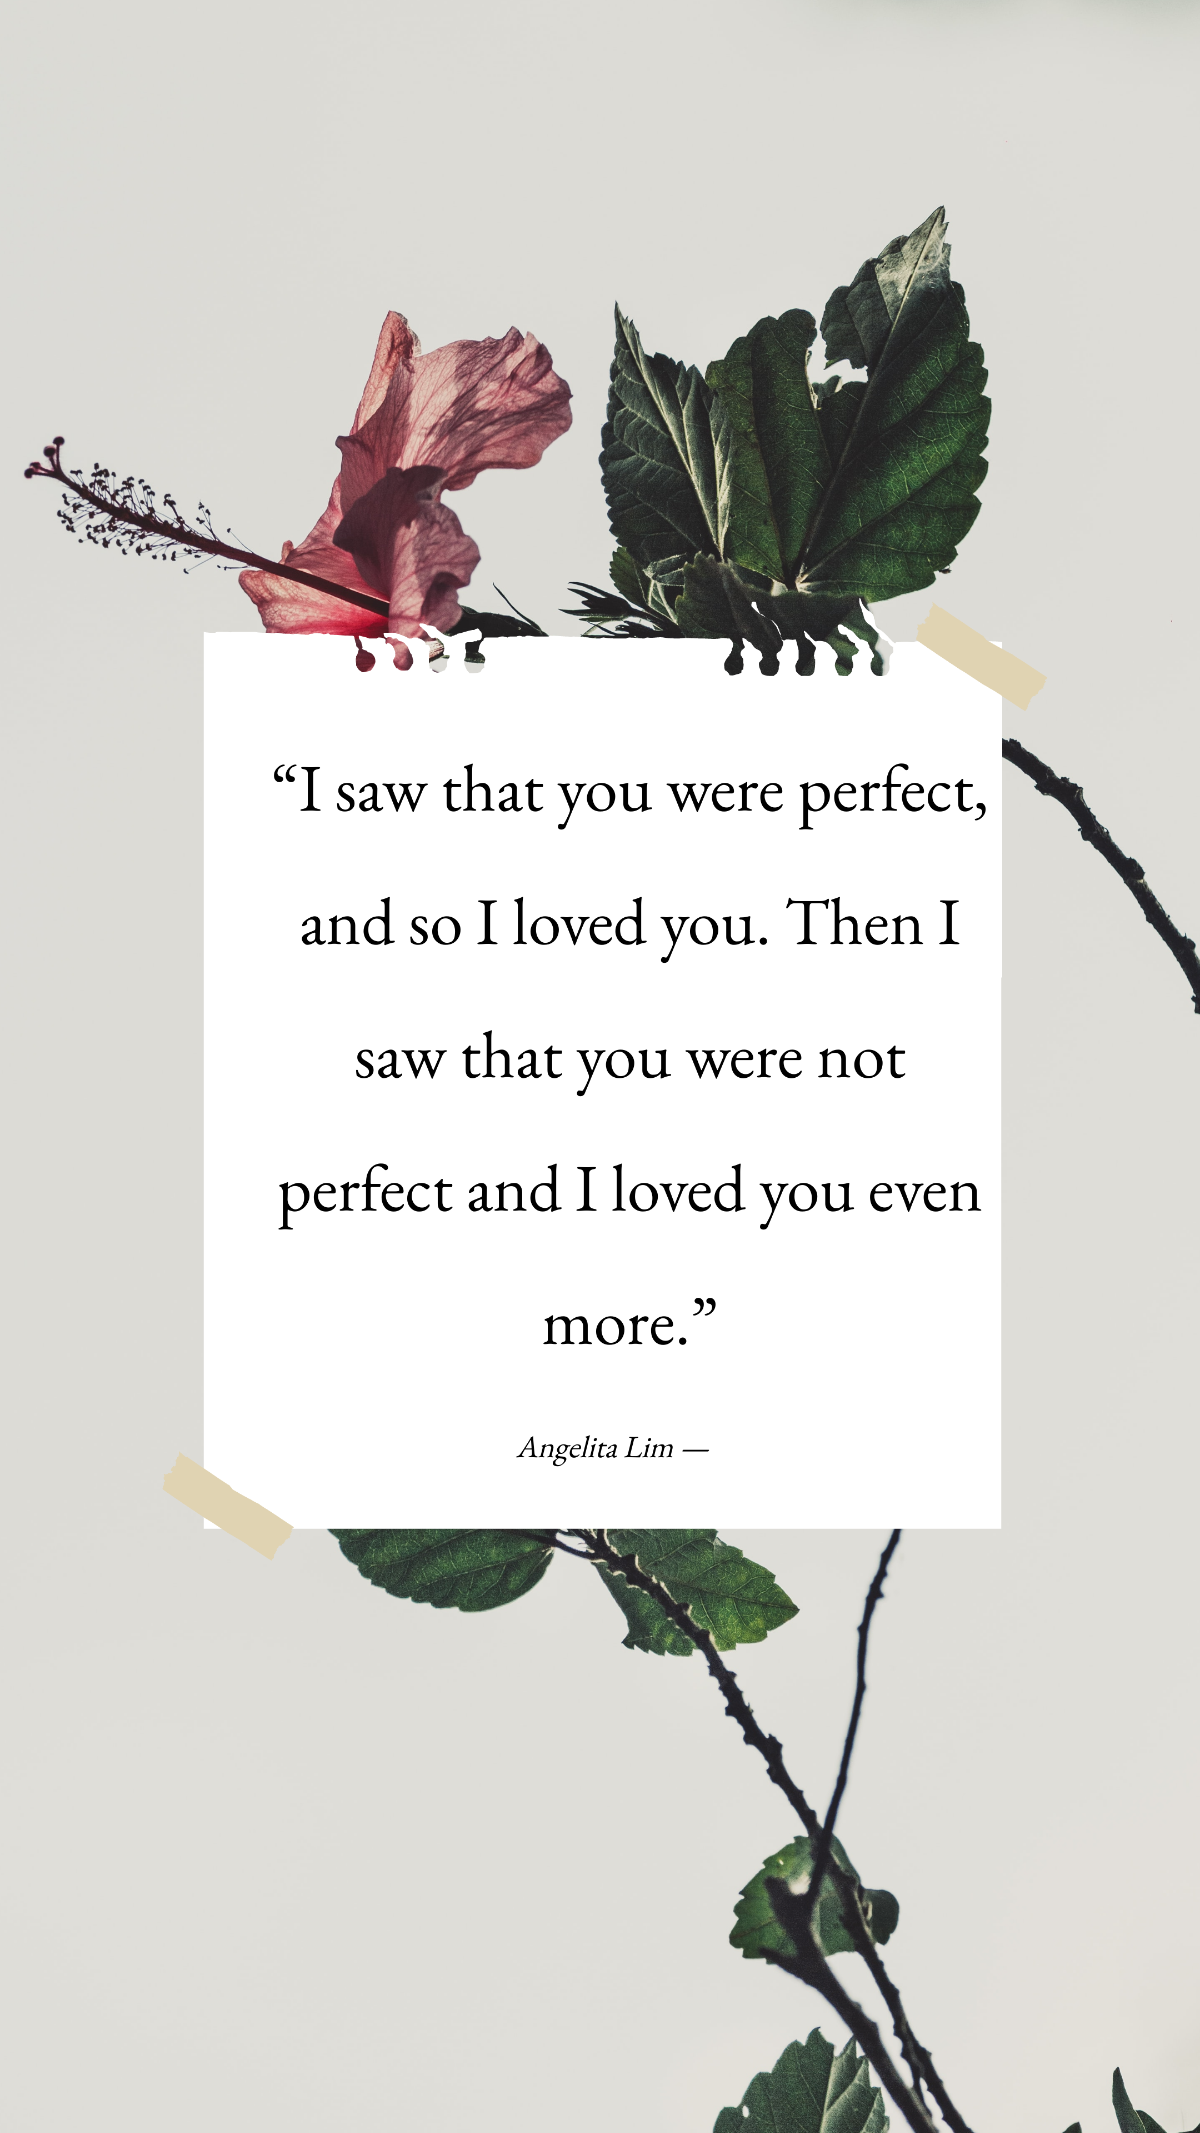 Angelita Lim — “I saw that you were perfect, and so I loved you. Then I saw that you were not perfect and I loved you even more.”